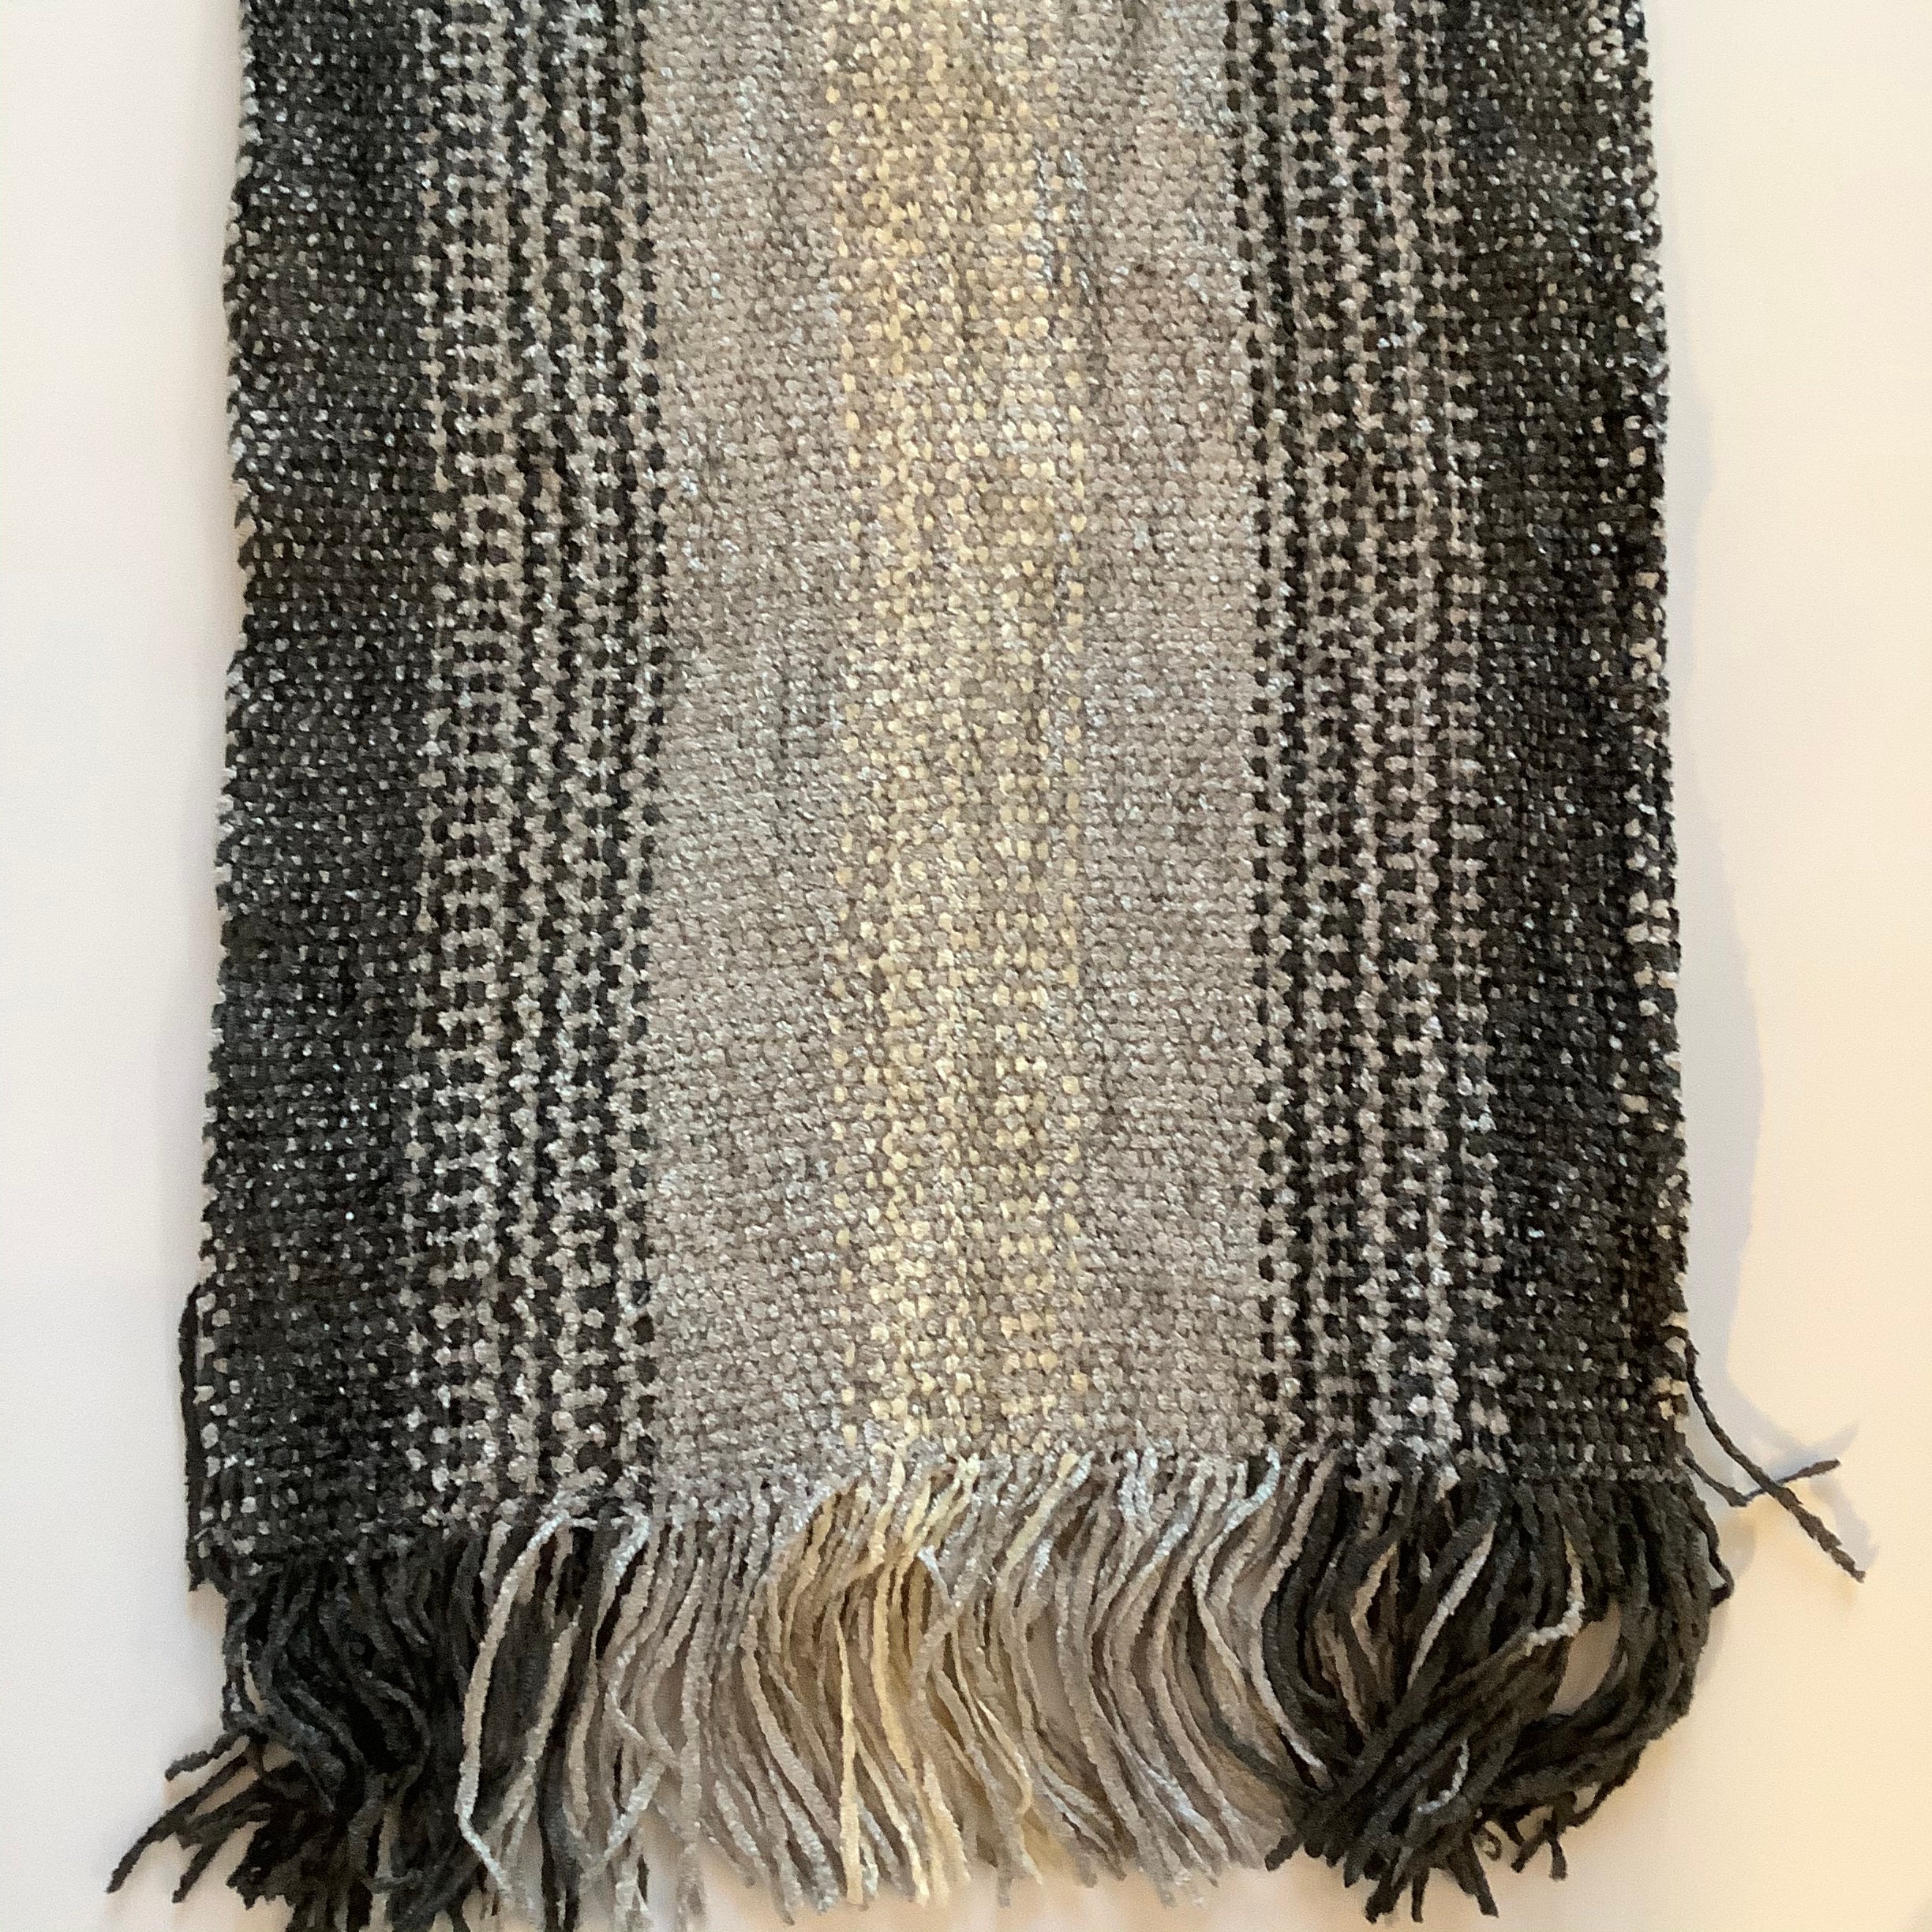 Handwoven Scarves in Fashionable Grey - Etsy